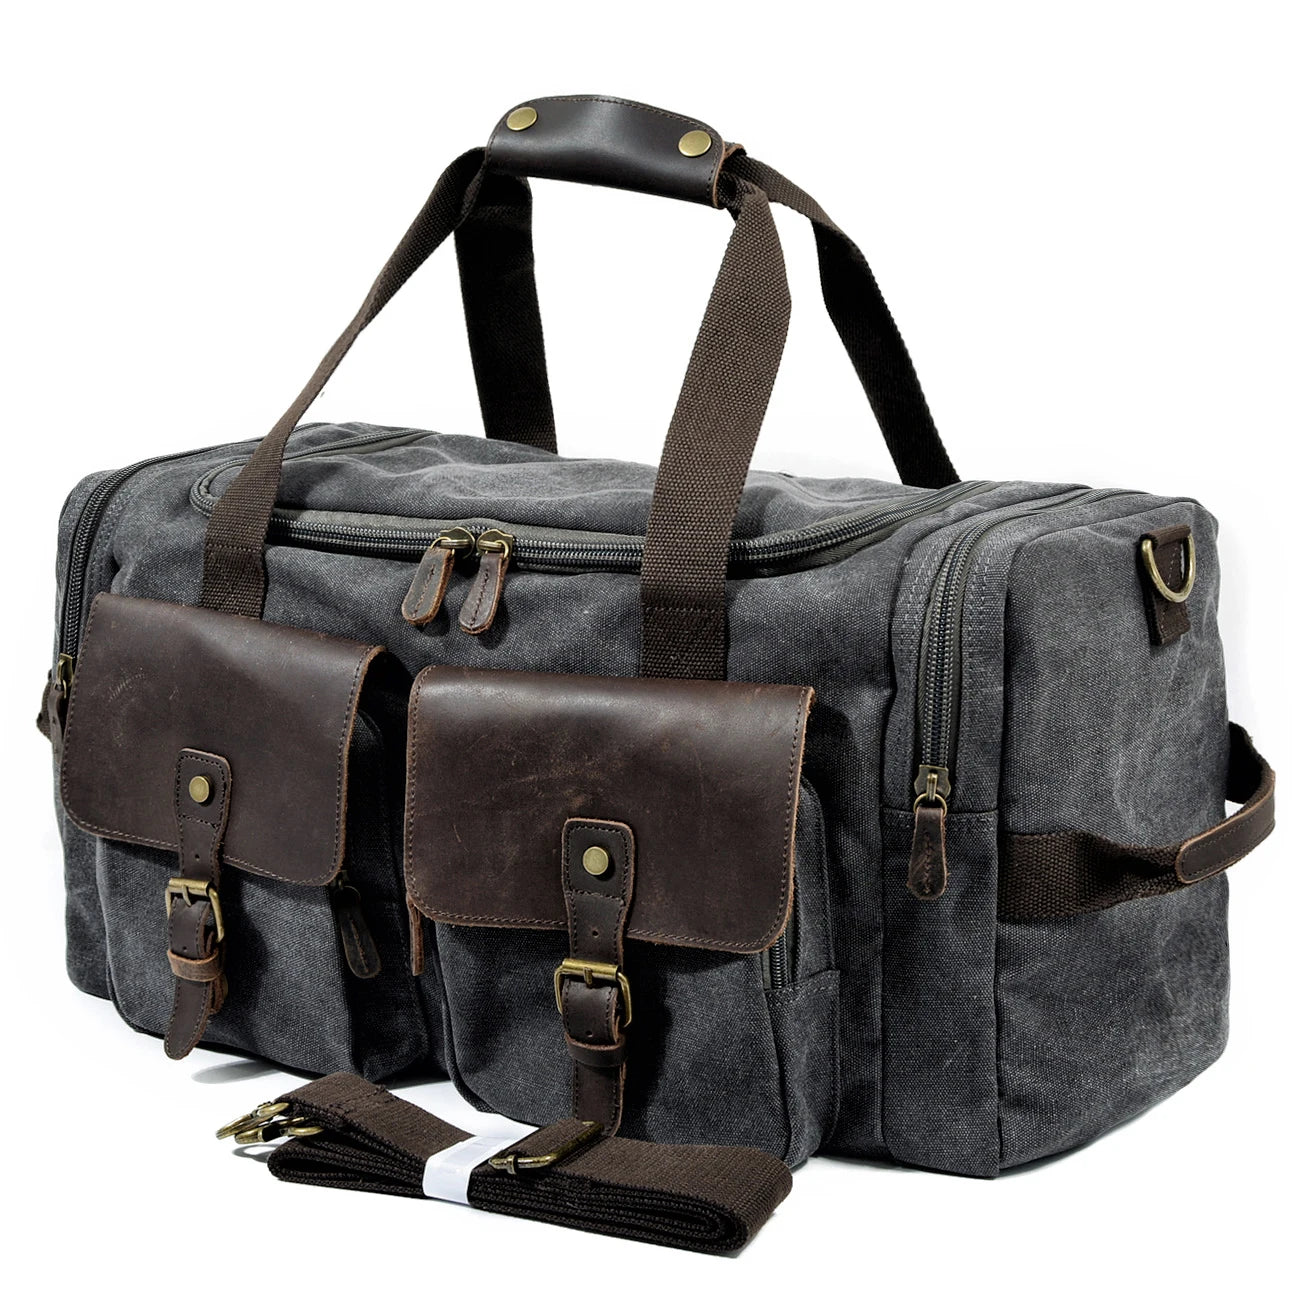 Large Canvas & Leather Duffle Bag